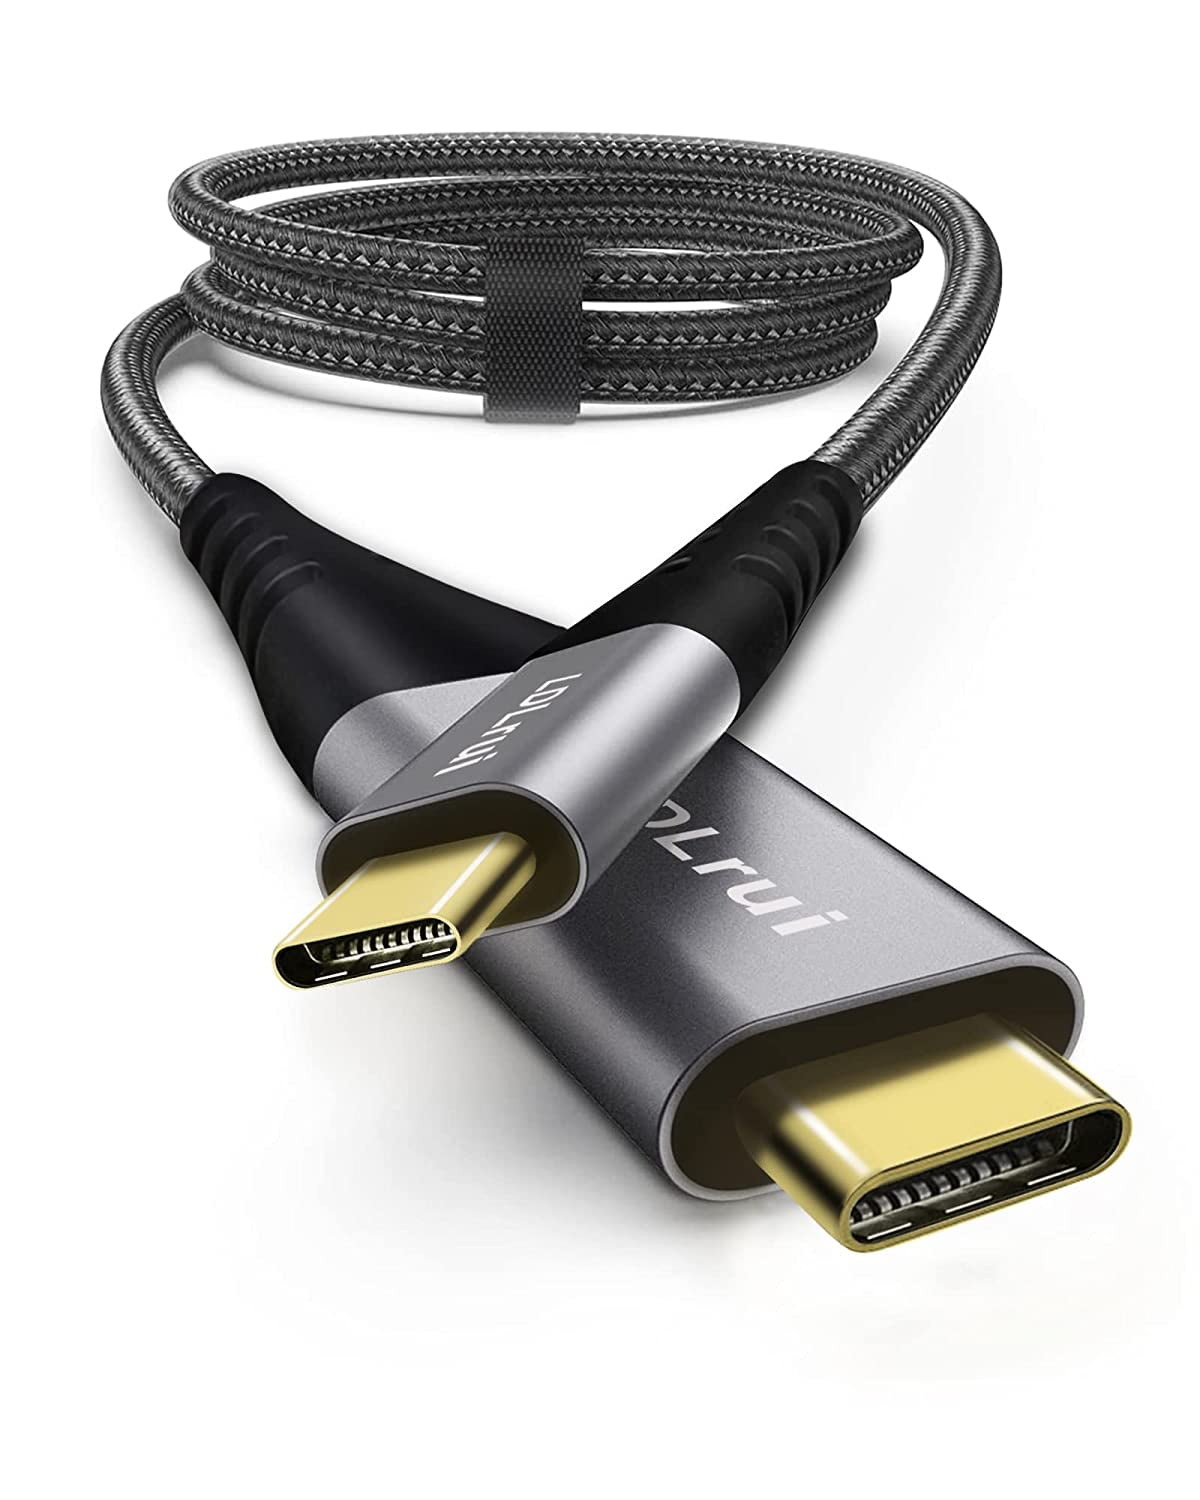 Cable Builders USB-C to USB-C Cable USB 3.1 Gen 2 for sale online